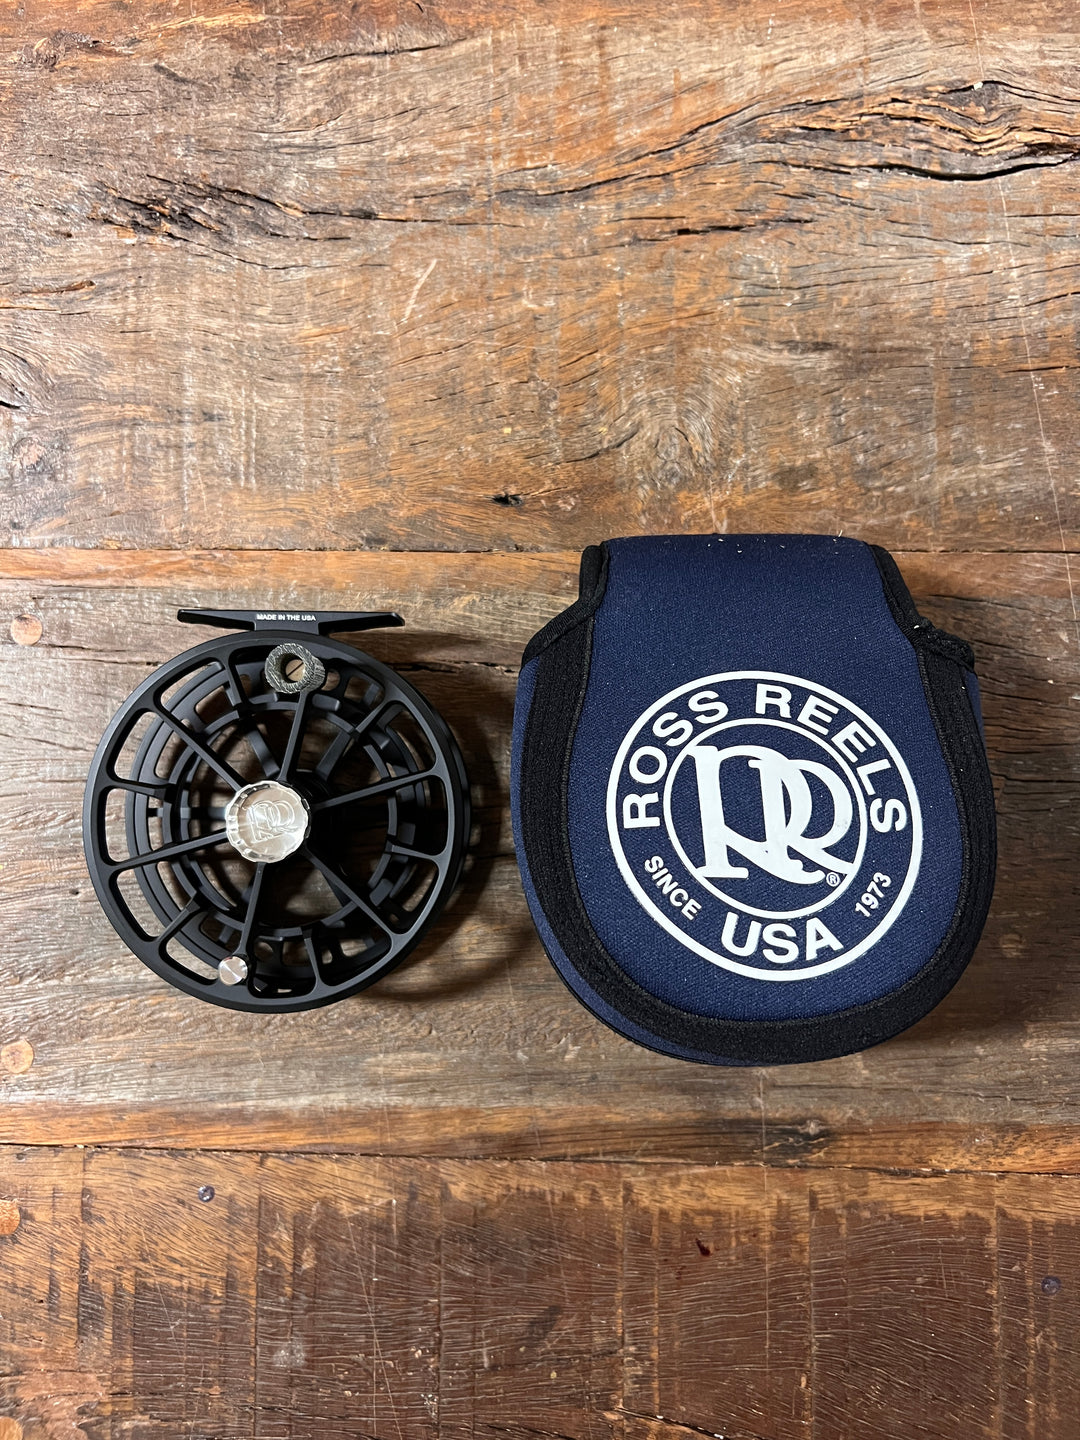 Ross Reels USA Evolution R Fly Fishing Reel Product Details